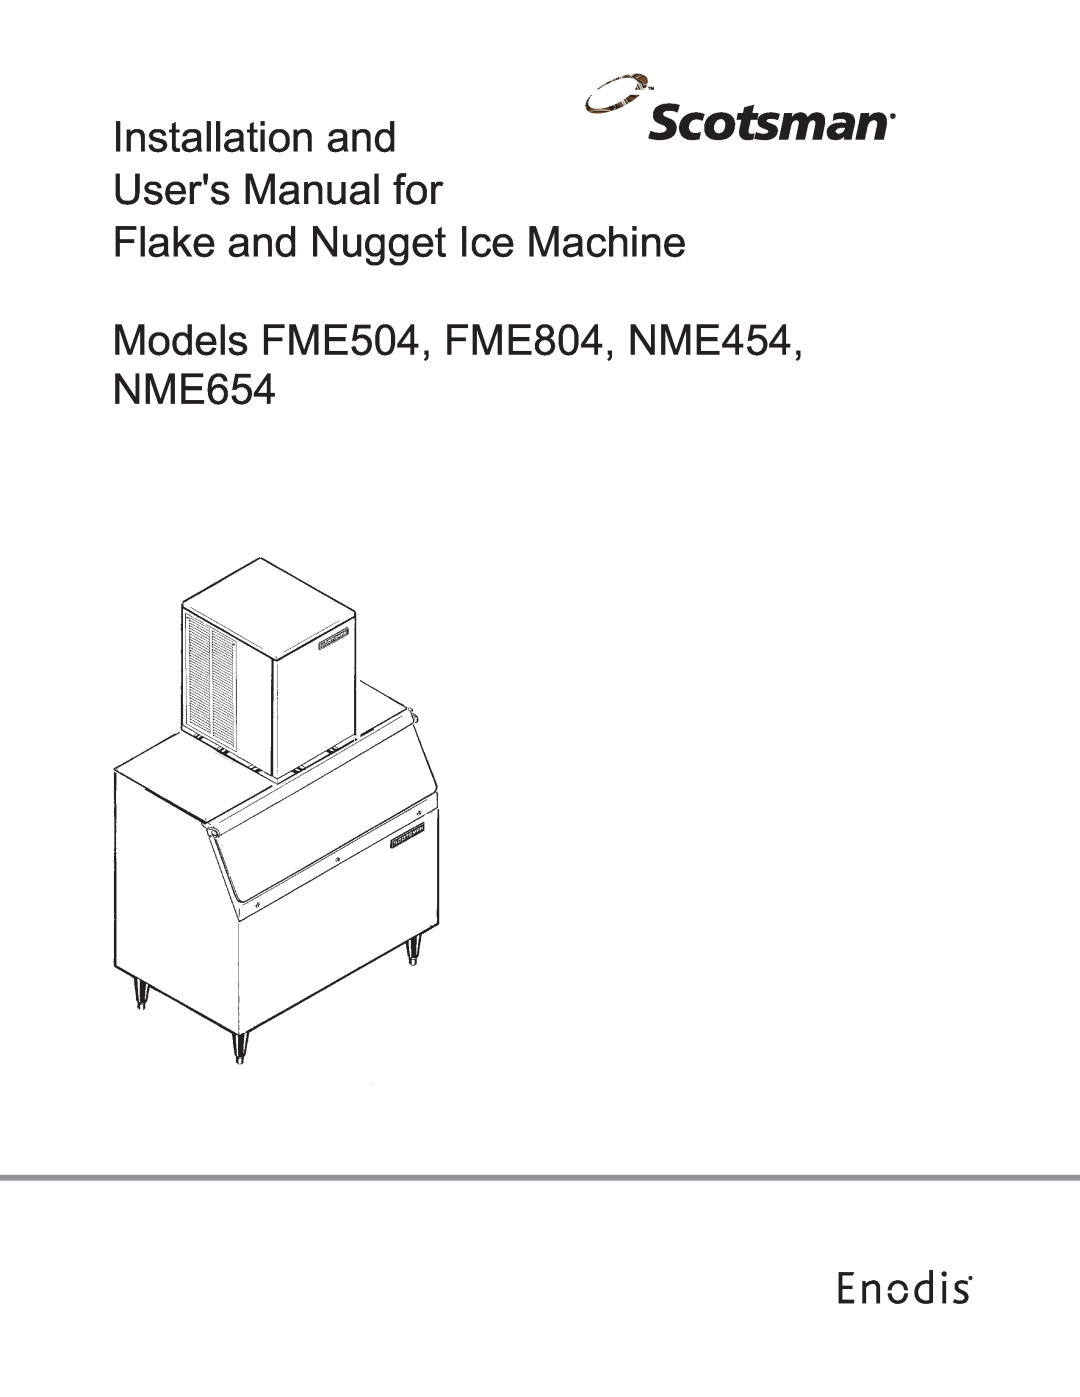 Scotsman Ice Flake and Nugget Ice Machine user manual Models FME504, FME804, NME454, NME654 